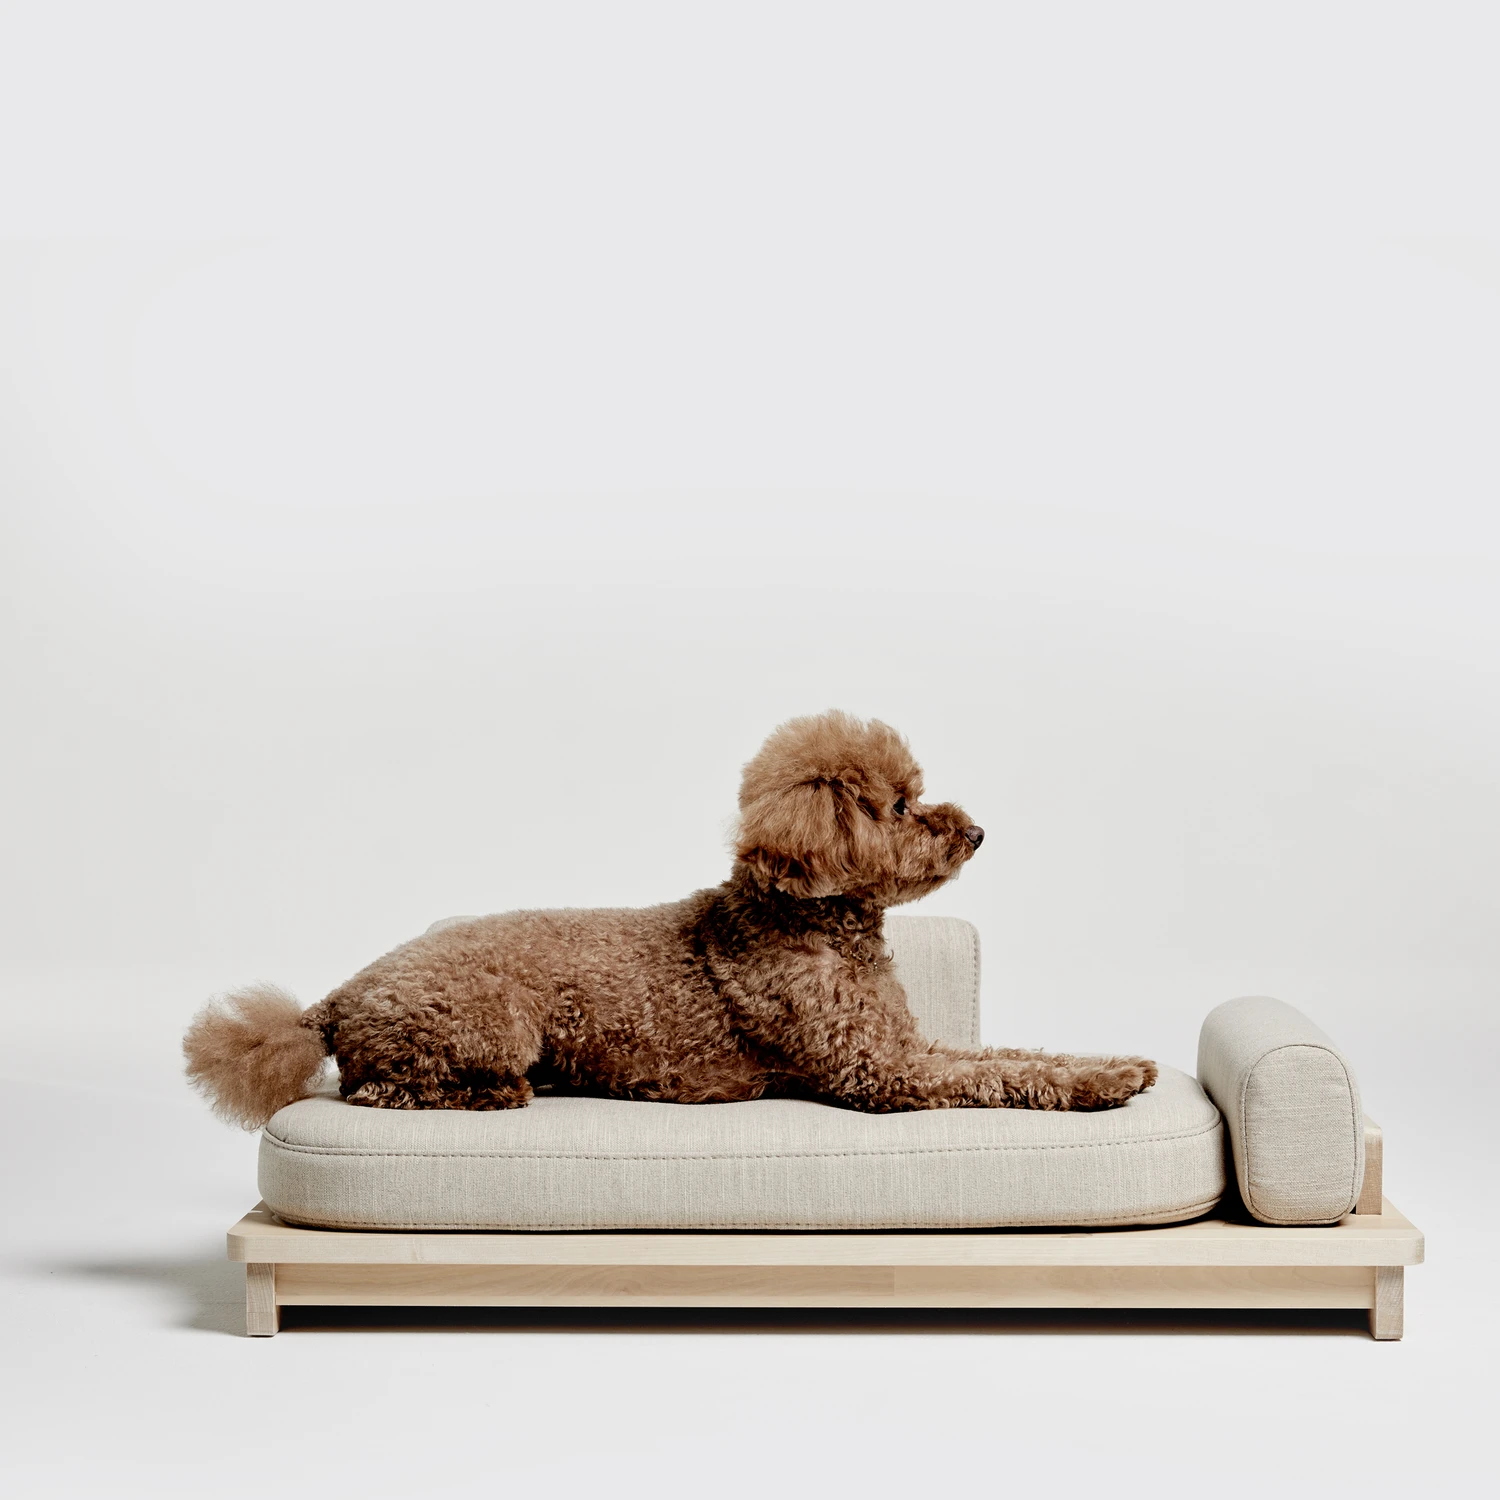 Pet Boutique - Dog Beds - Oatmeal Linden Day Dog Bed by Pets So Good